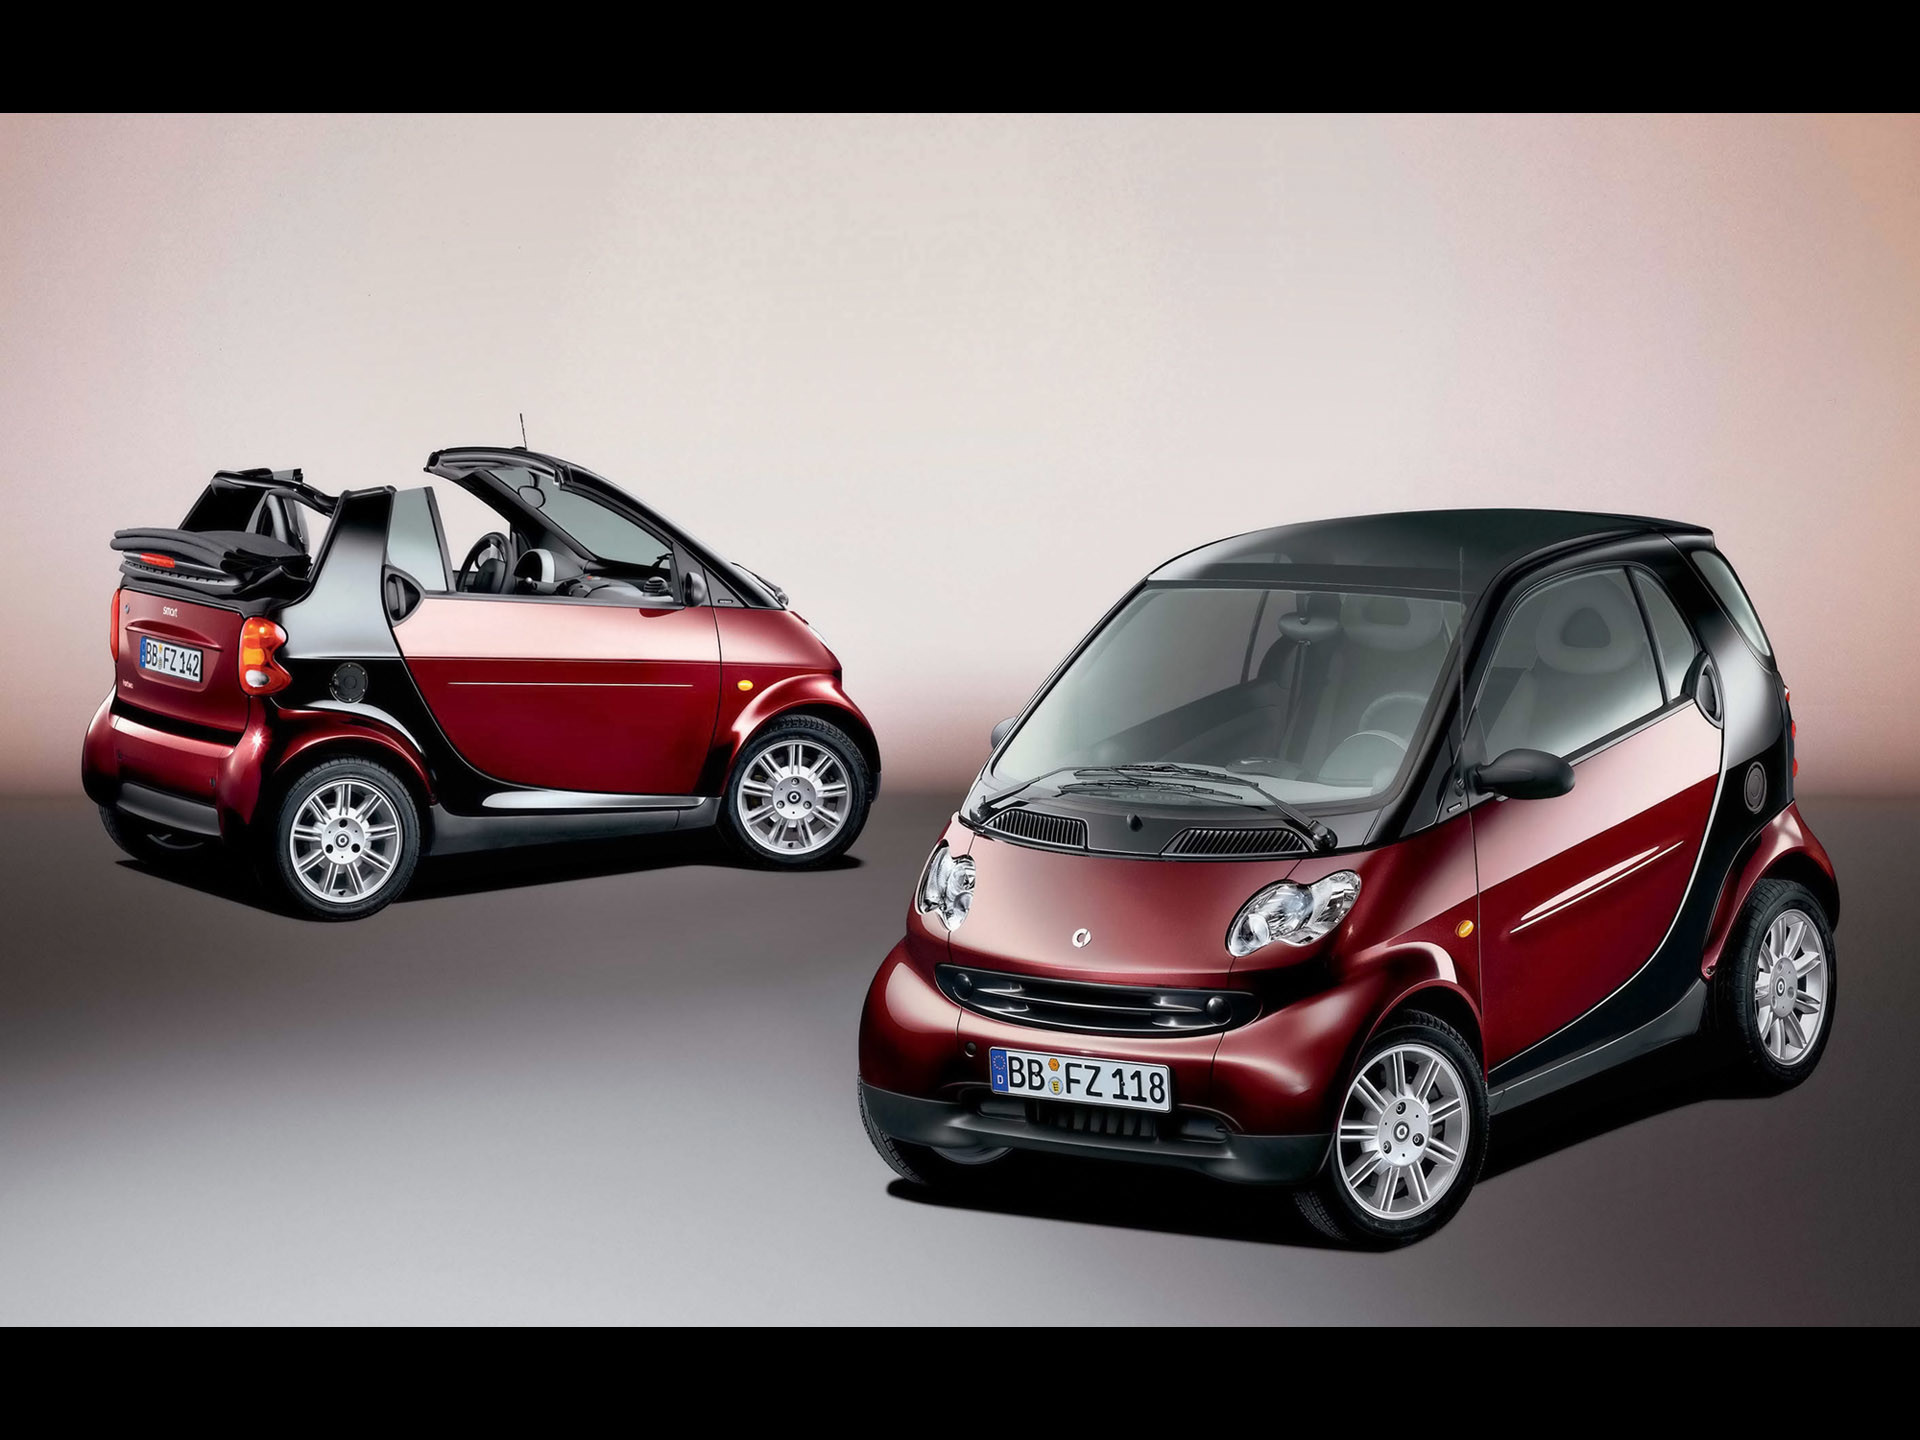 1920x1440 Perfect Smart Car BMW At Images O2be And Smart Car BMW On Favorite